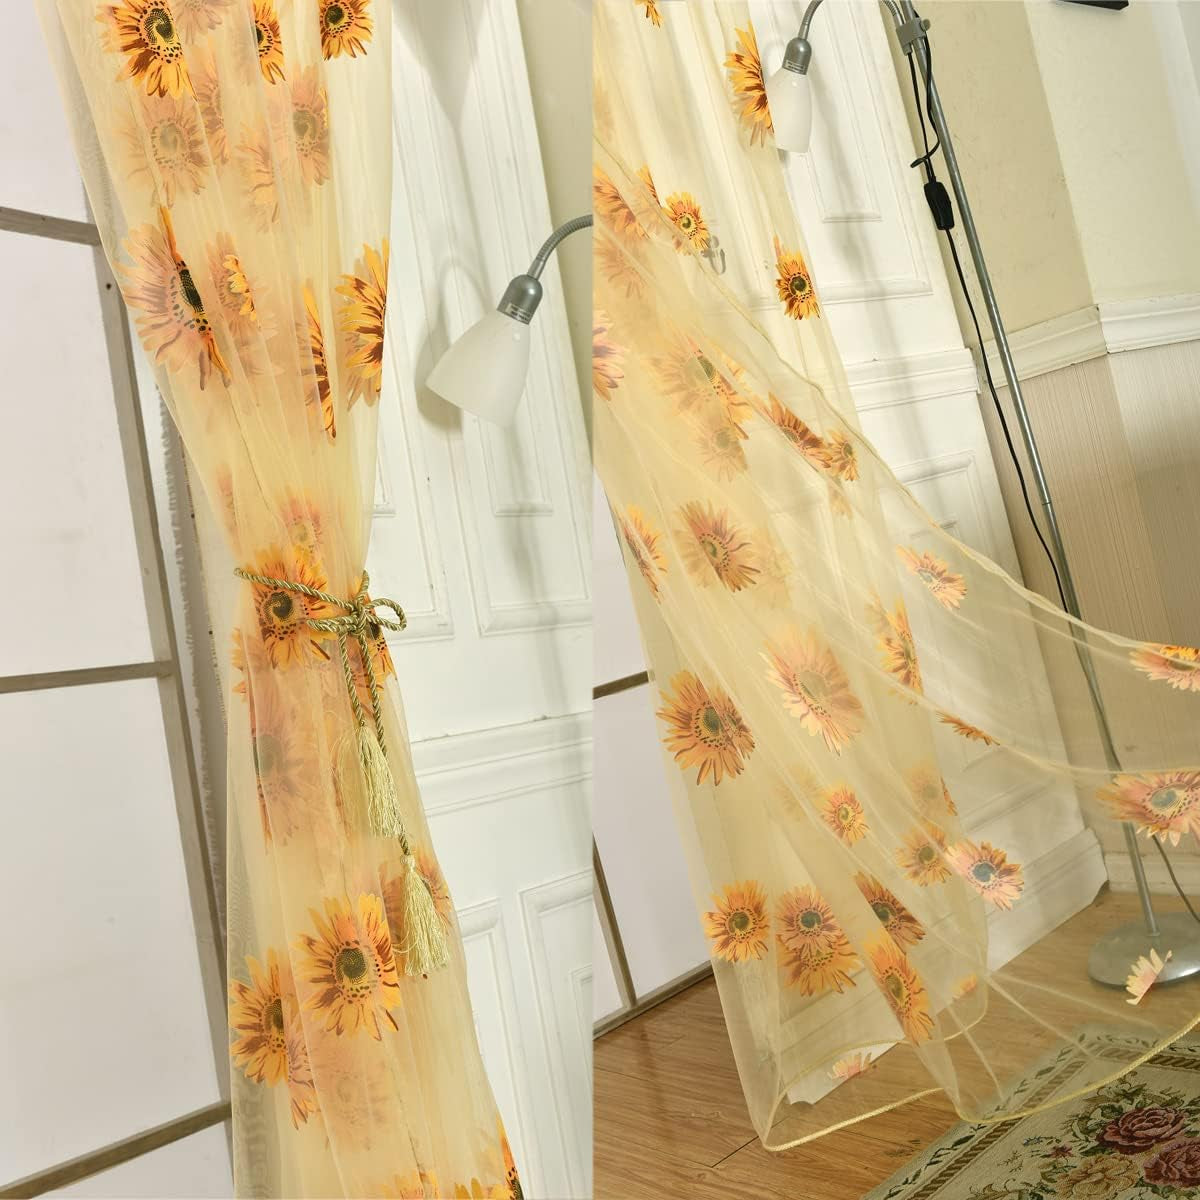 Ufurty Rely2016 Sunflower Window Curtain, 2PCS Sun Flower Floral Voile Sheer Curtain Panels Tulle Room Salix Leaf Sheer Gauze Curtain for Living Room, Bedroom, Balcony - Rod Pocket Top (100 X 200)  Rely2016   